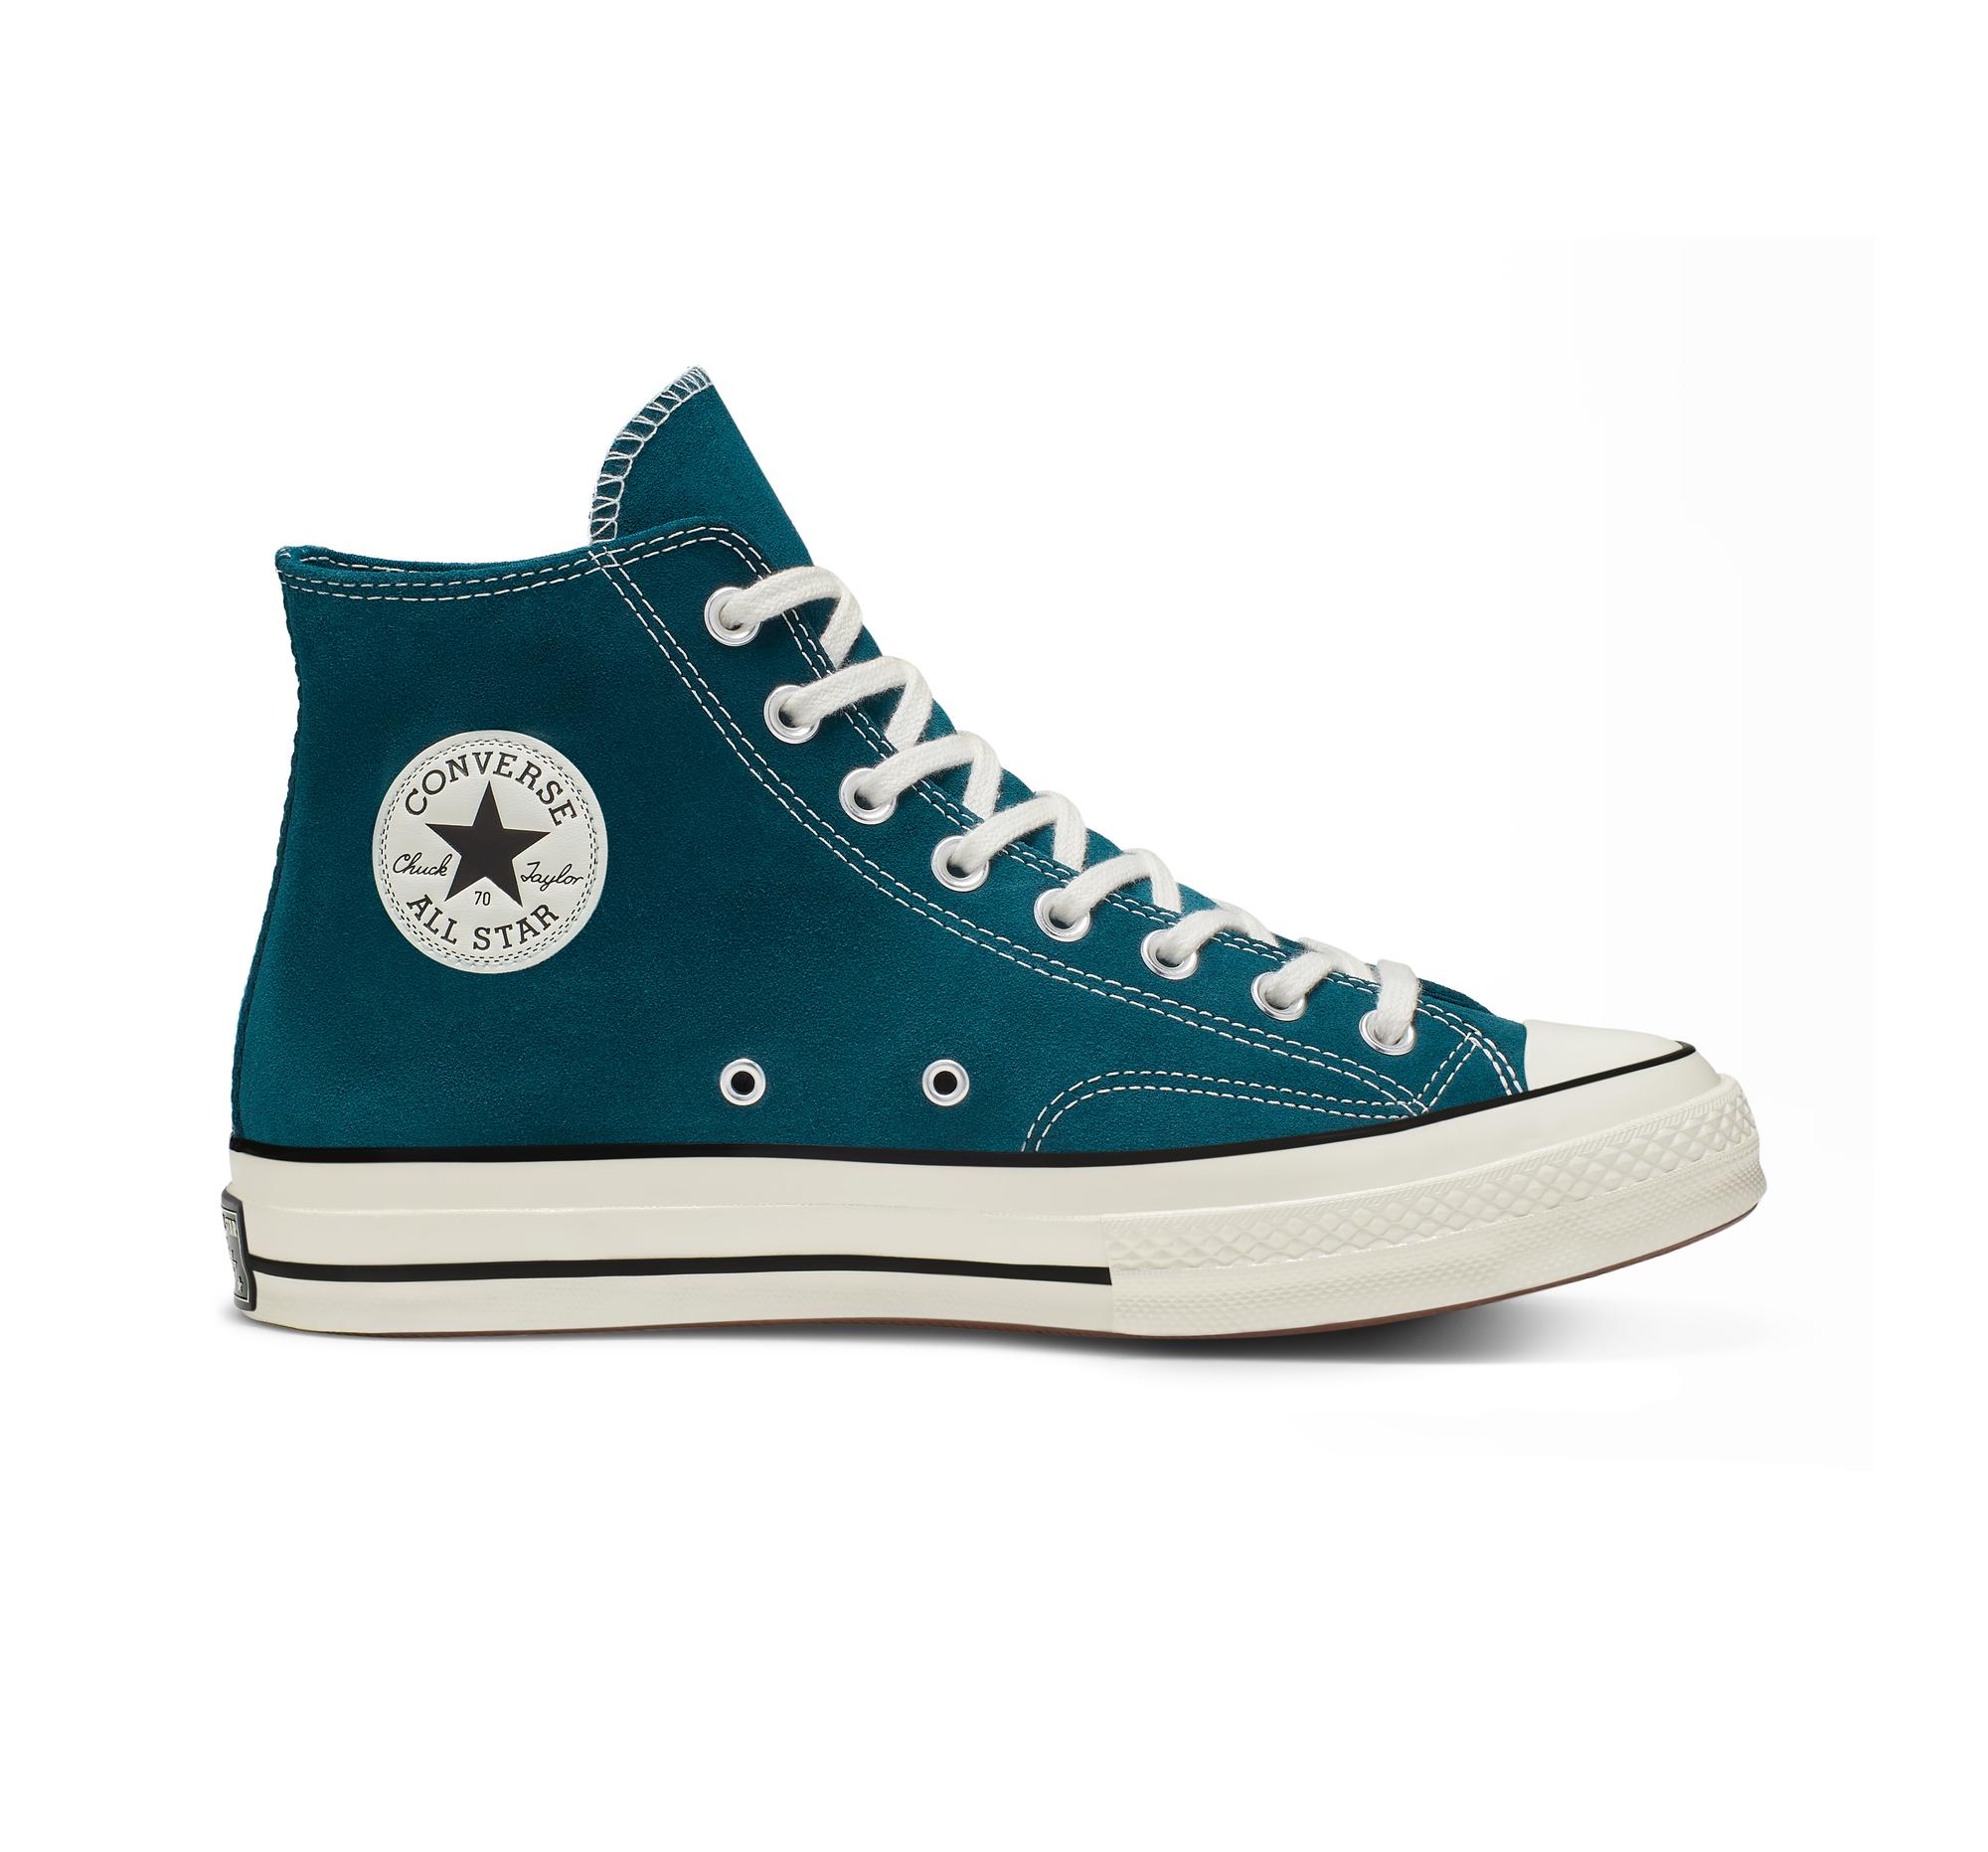 blue suede converse high tops